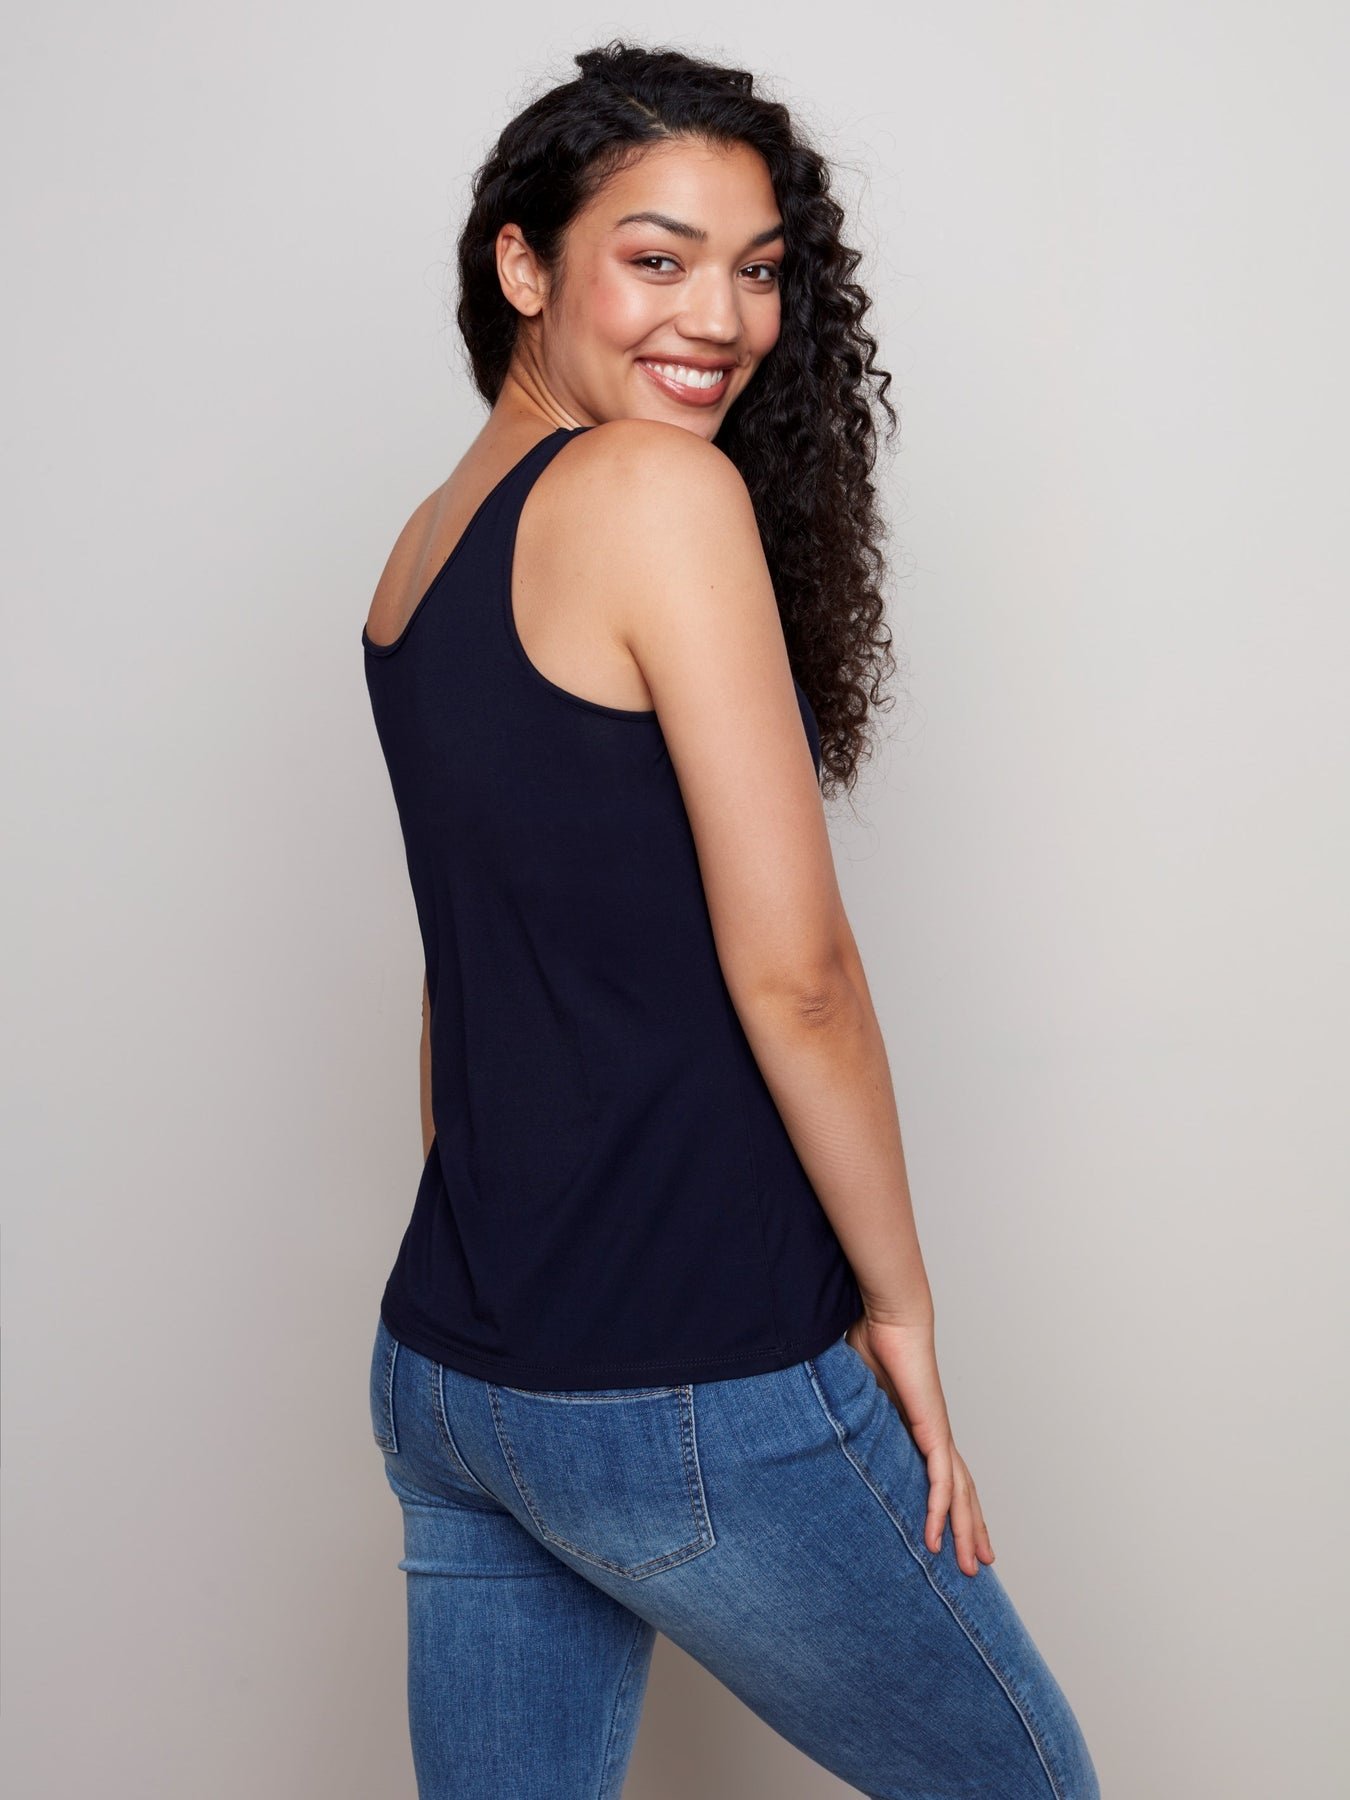 Summer Style Guide: Pairing Aeropostale Cami Tank Tops With Denim